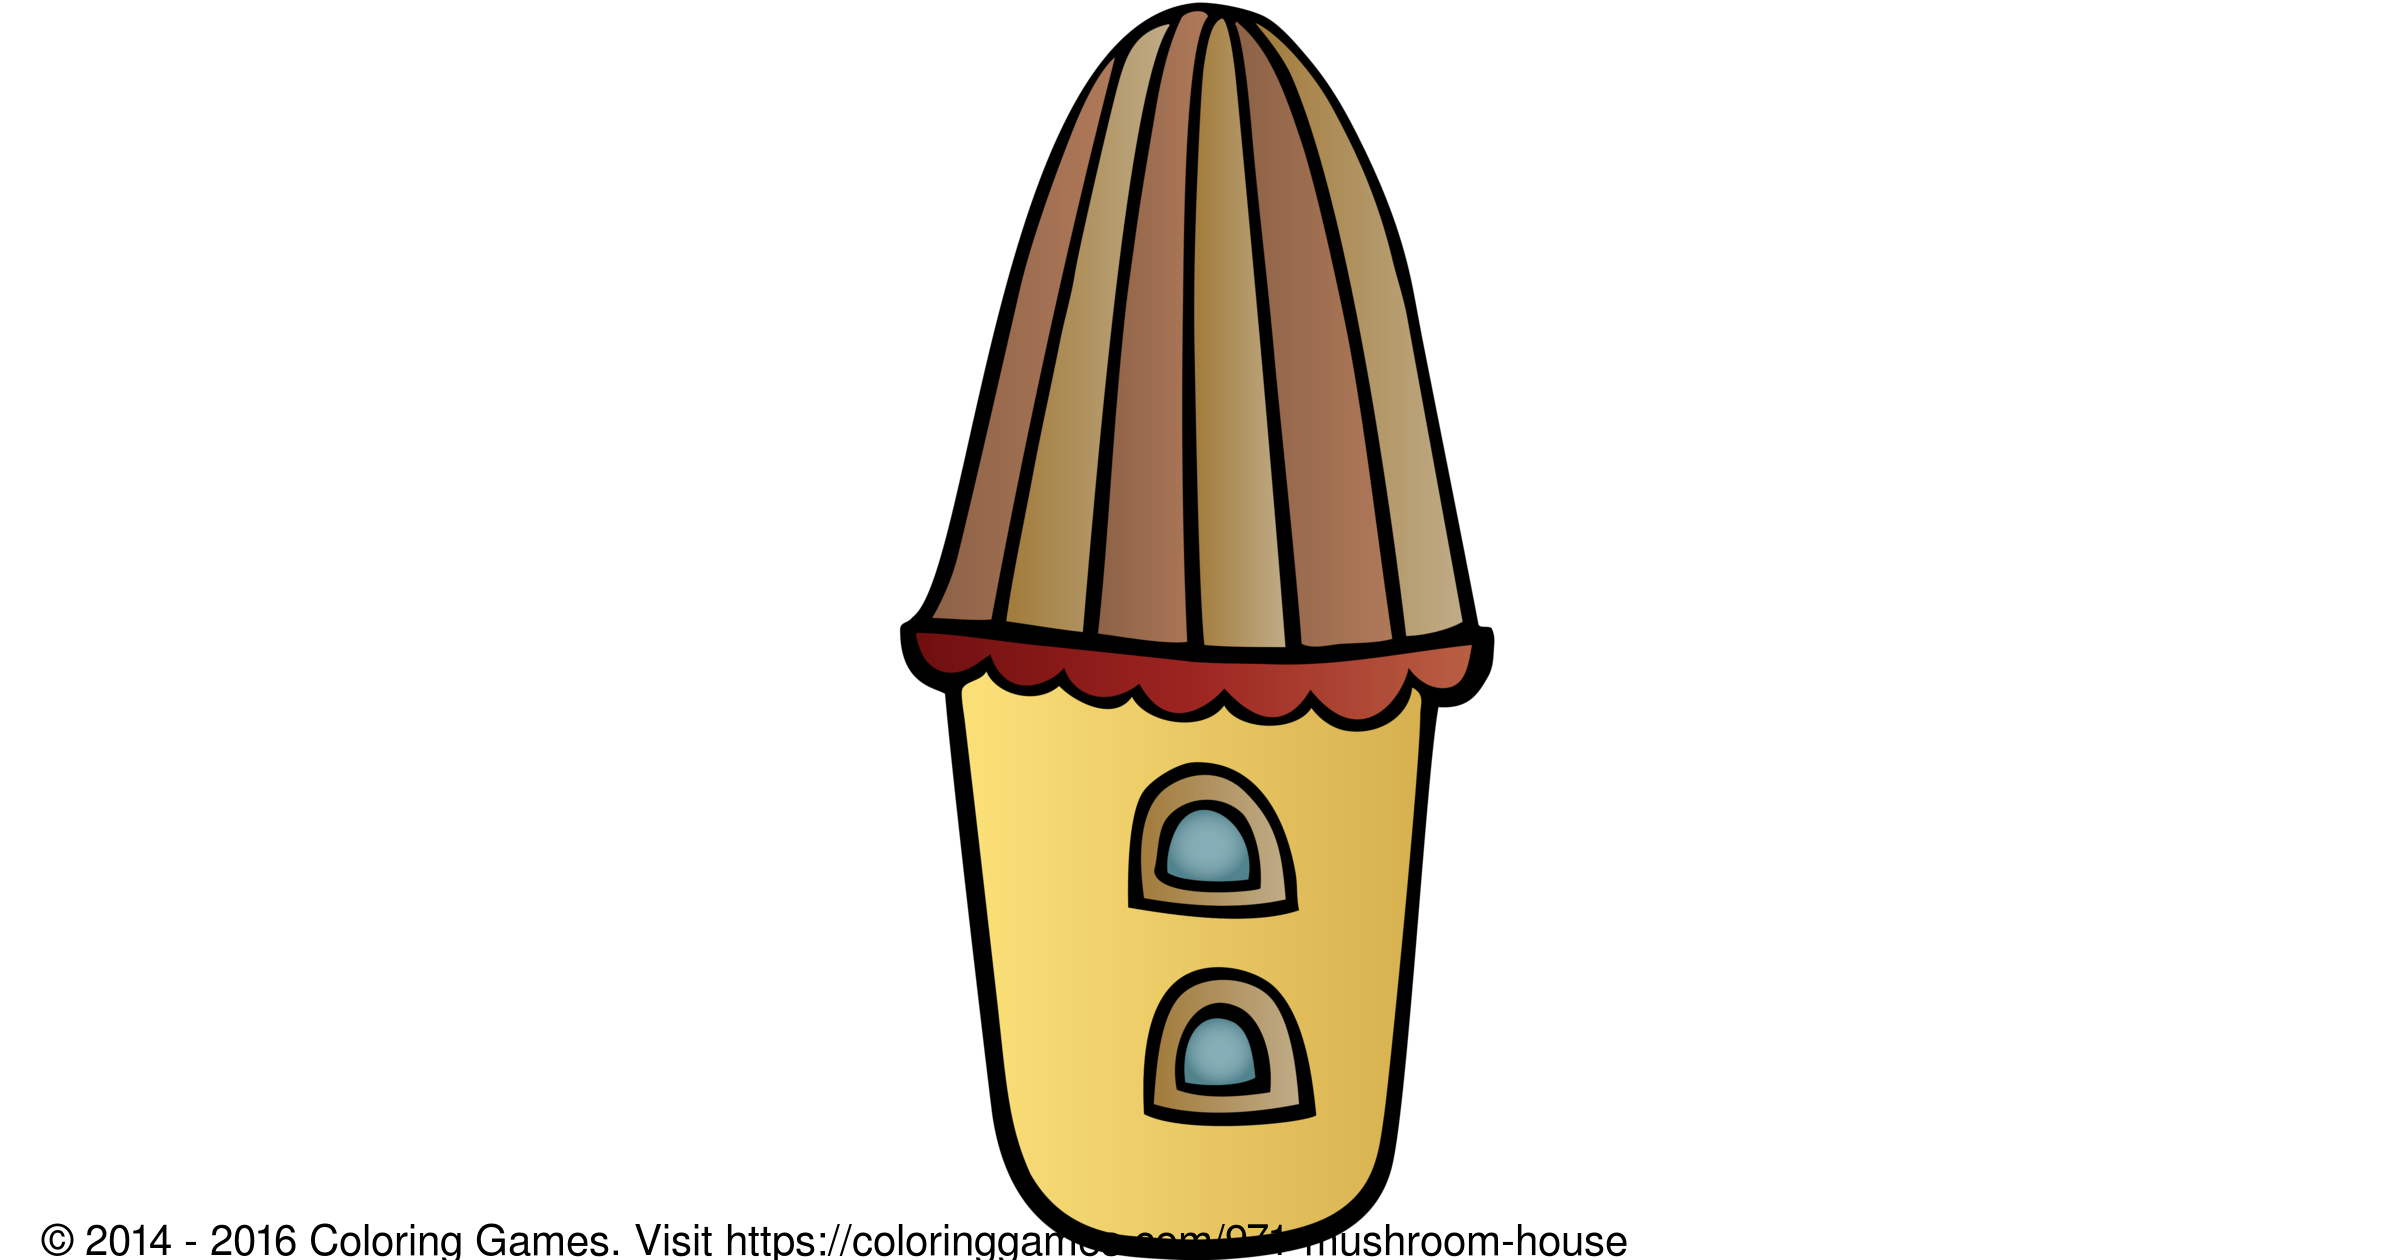 Mushroom house - Coloring Games and Coloring Pages